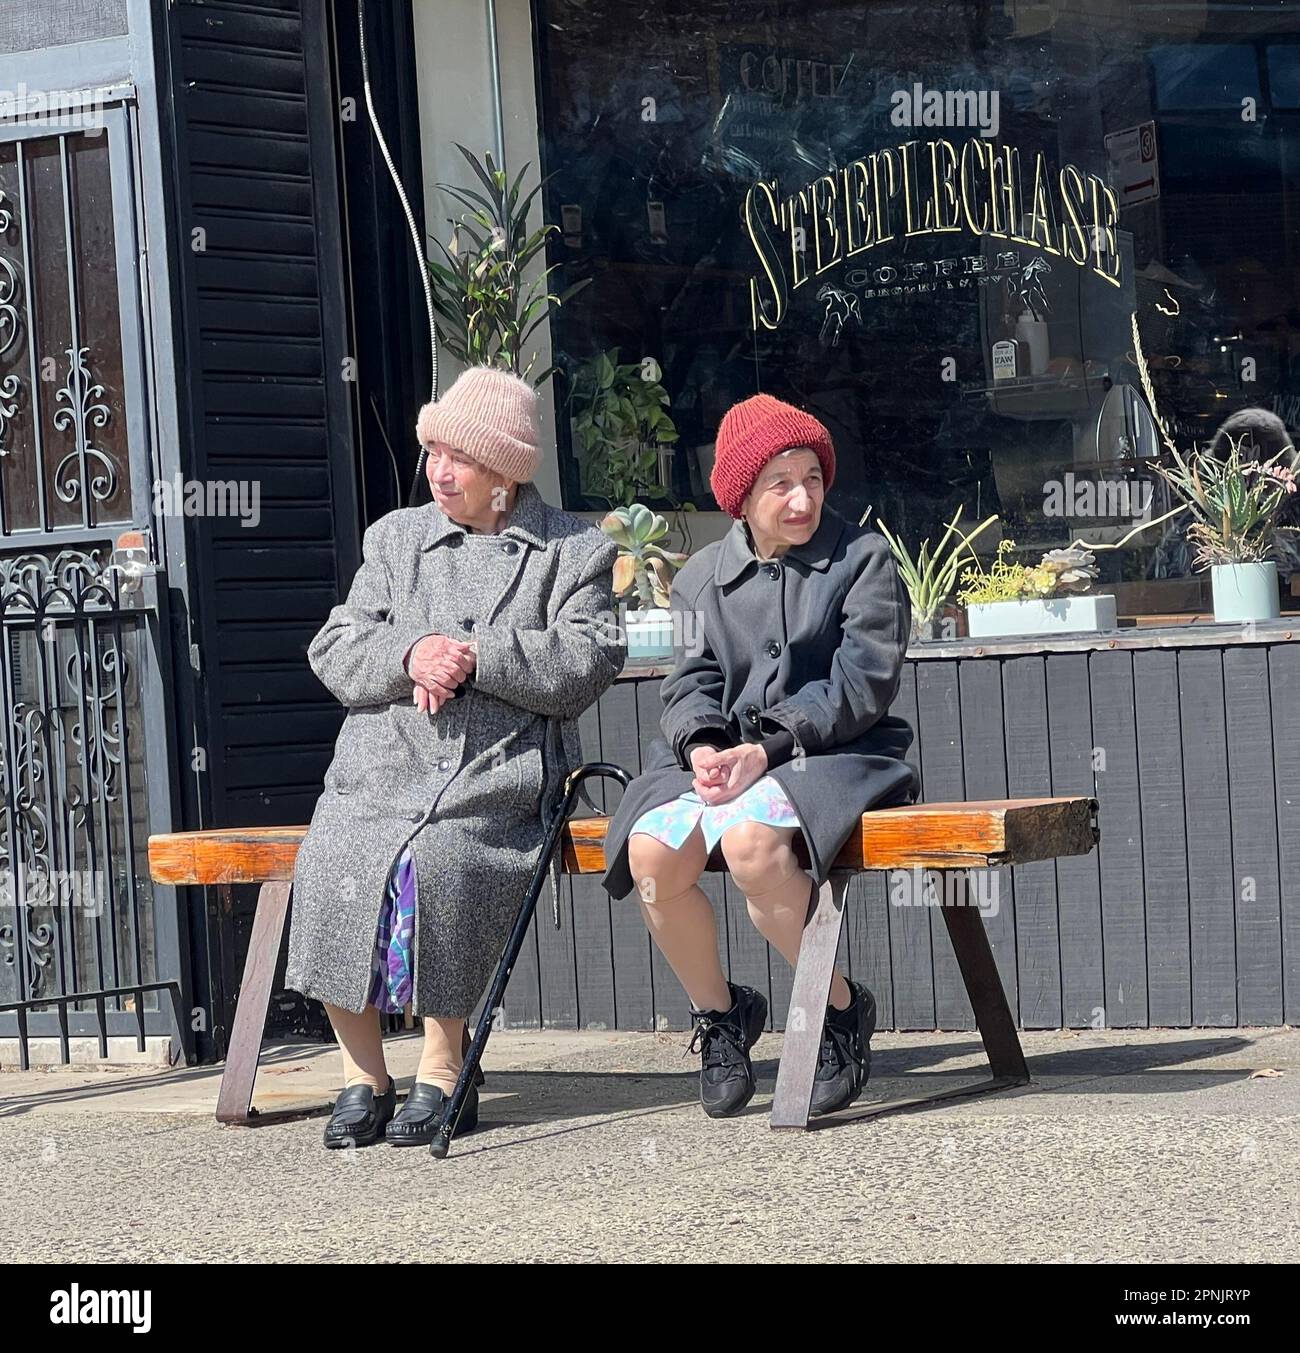 Two older women sitting in the early spring sun in front of the SteepleChase Cafe in in the Windsor Terrace neighborhood of Brooklyn, New York. Stock Photo